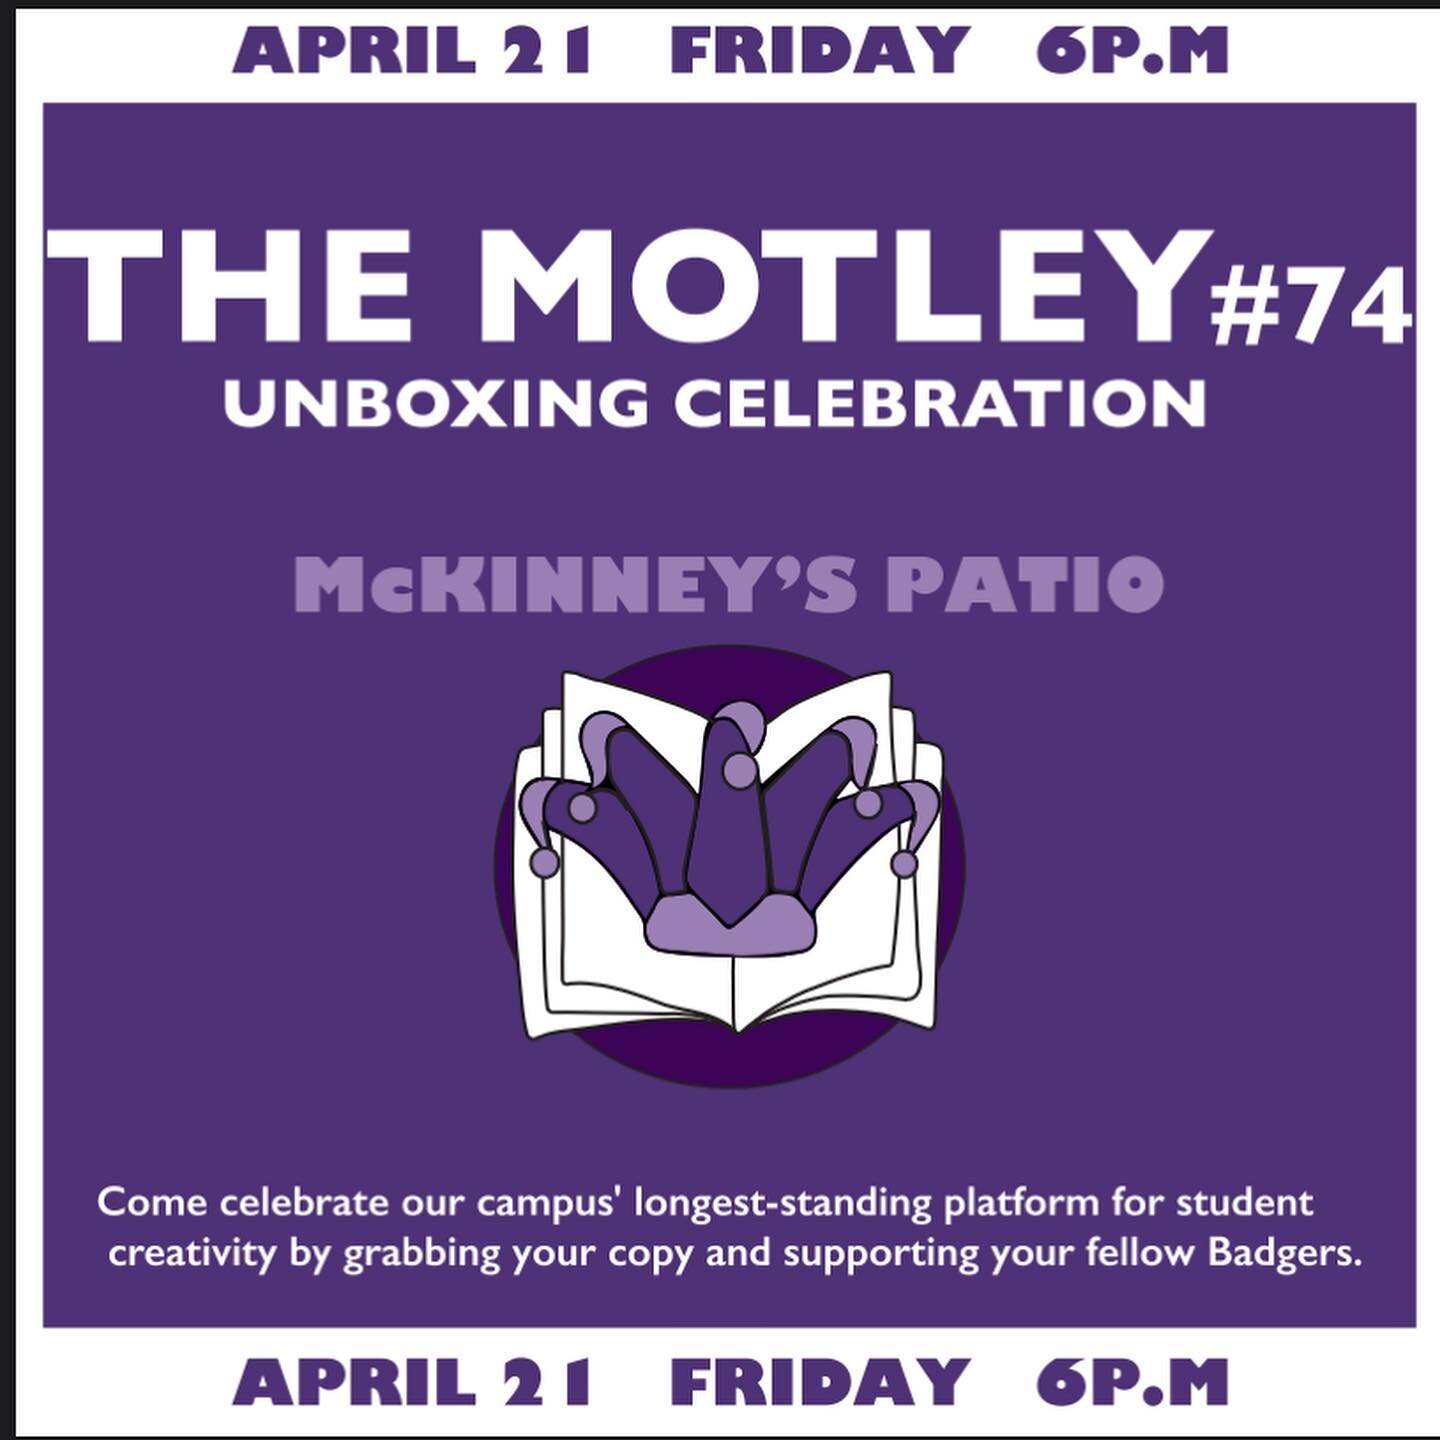 We are so excited to announce the #motleyunboxing this Friday at 6:00pm on the Mckinney&rsquo;s patio !! The team has been hard at work to make vol. 74 happen. Come grab a copy, check out creative student work, chat with the crew, and listen to some 